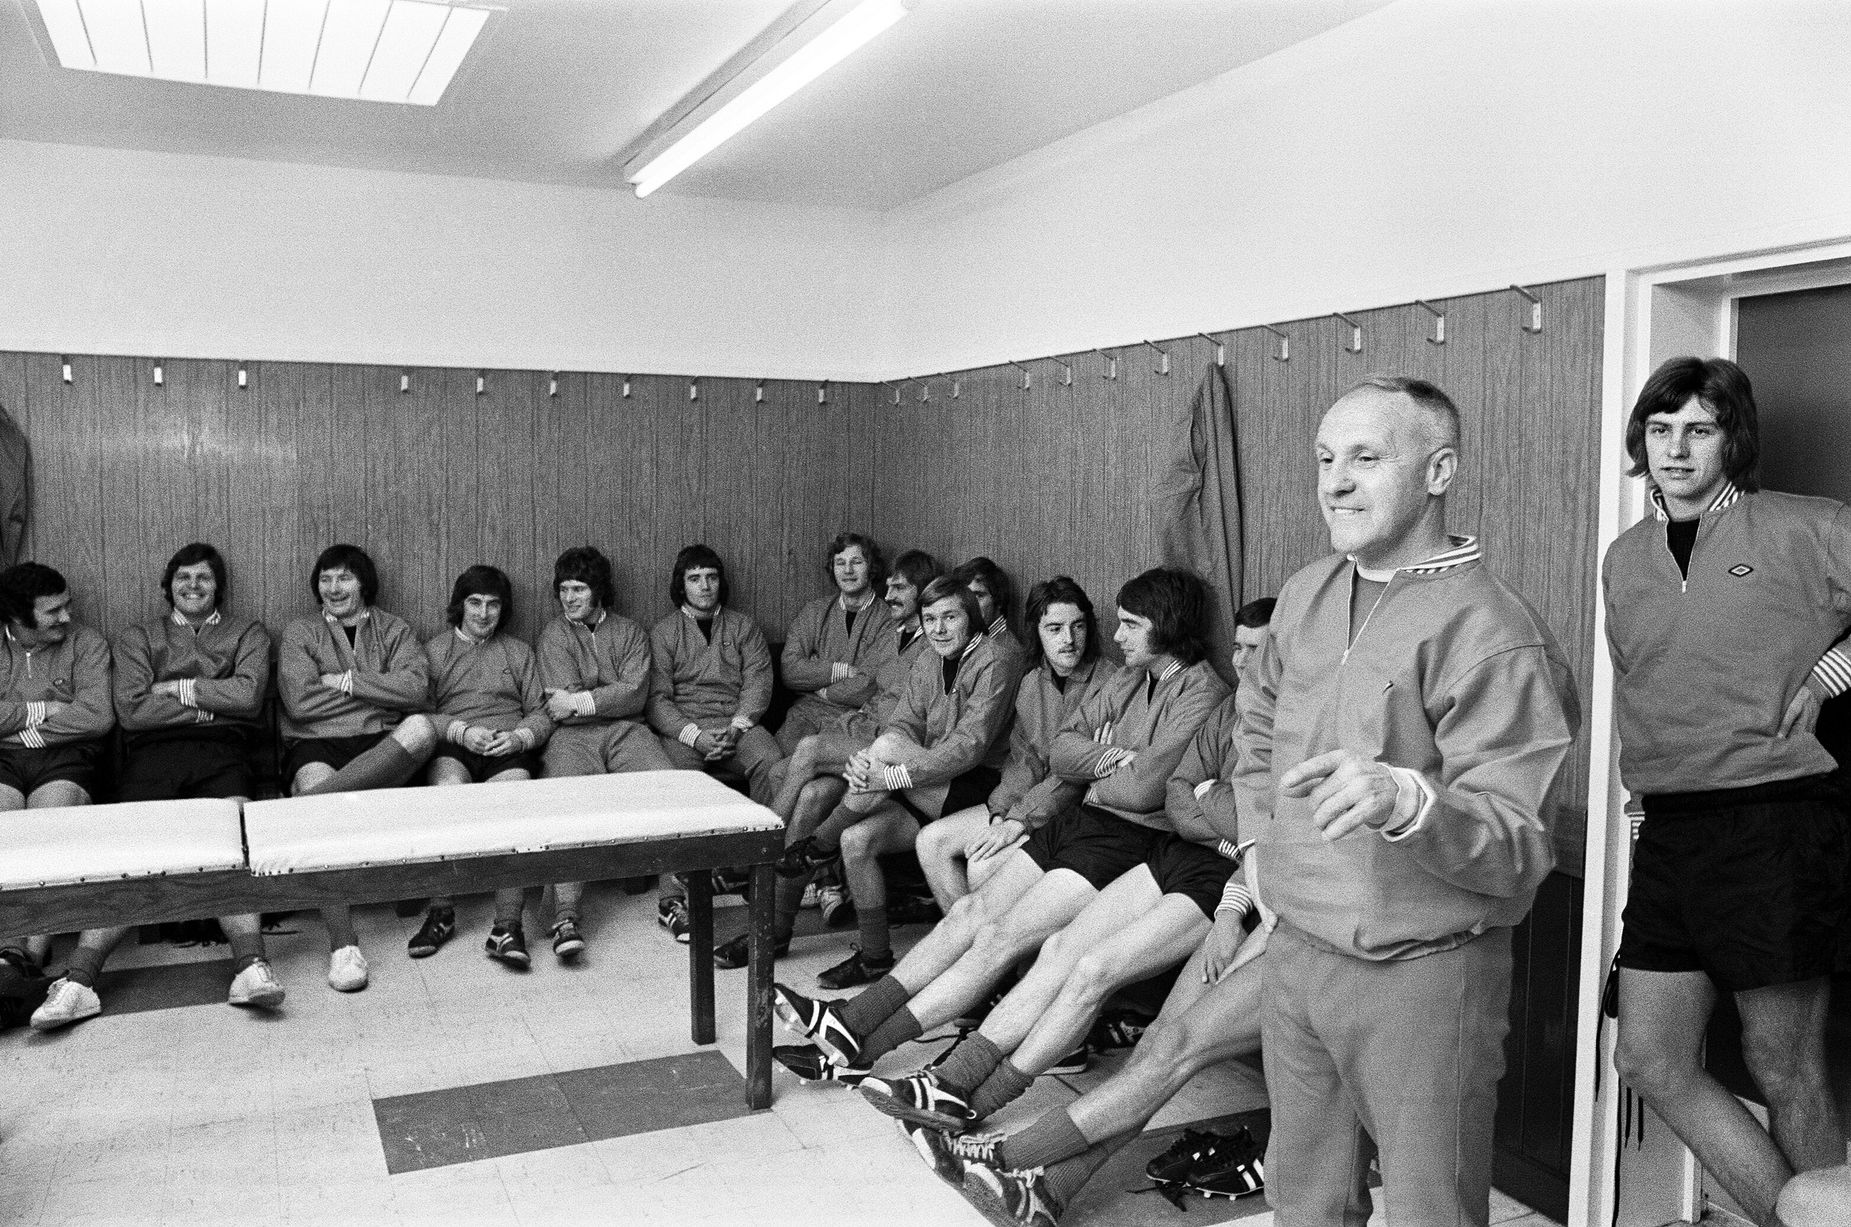 Bill Shankly with the team